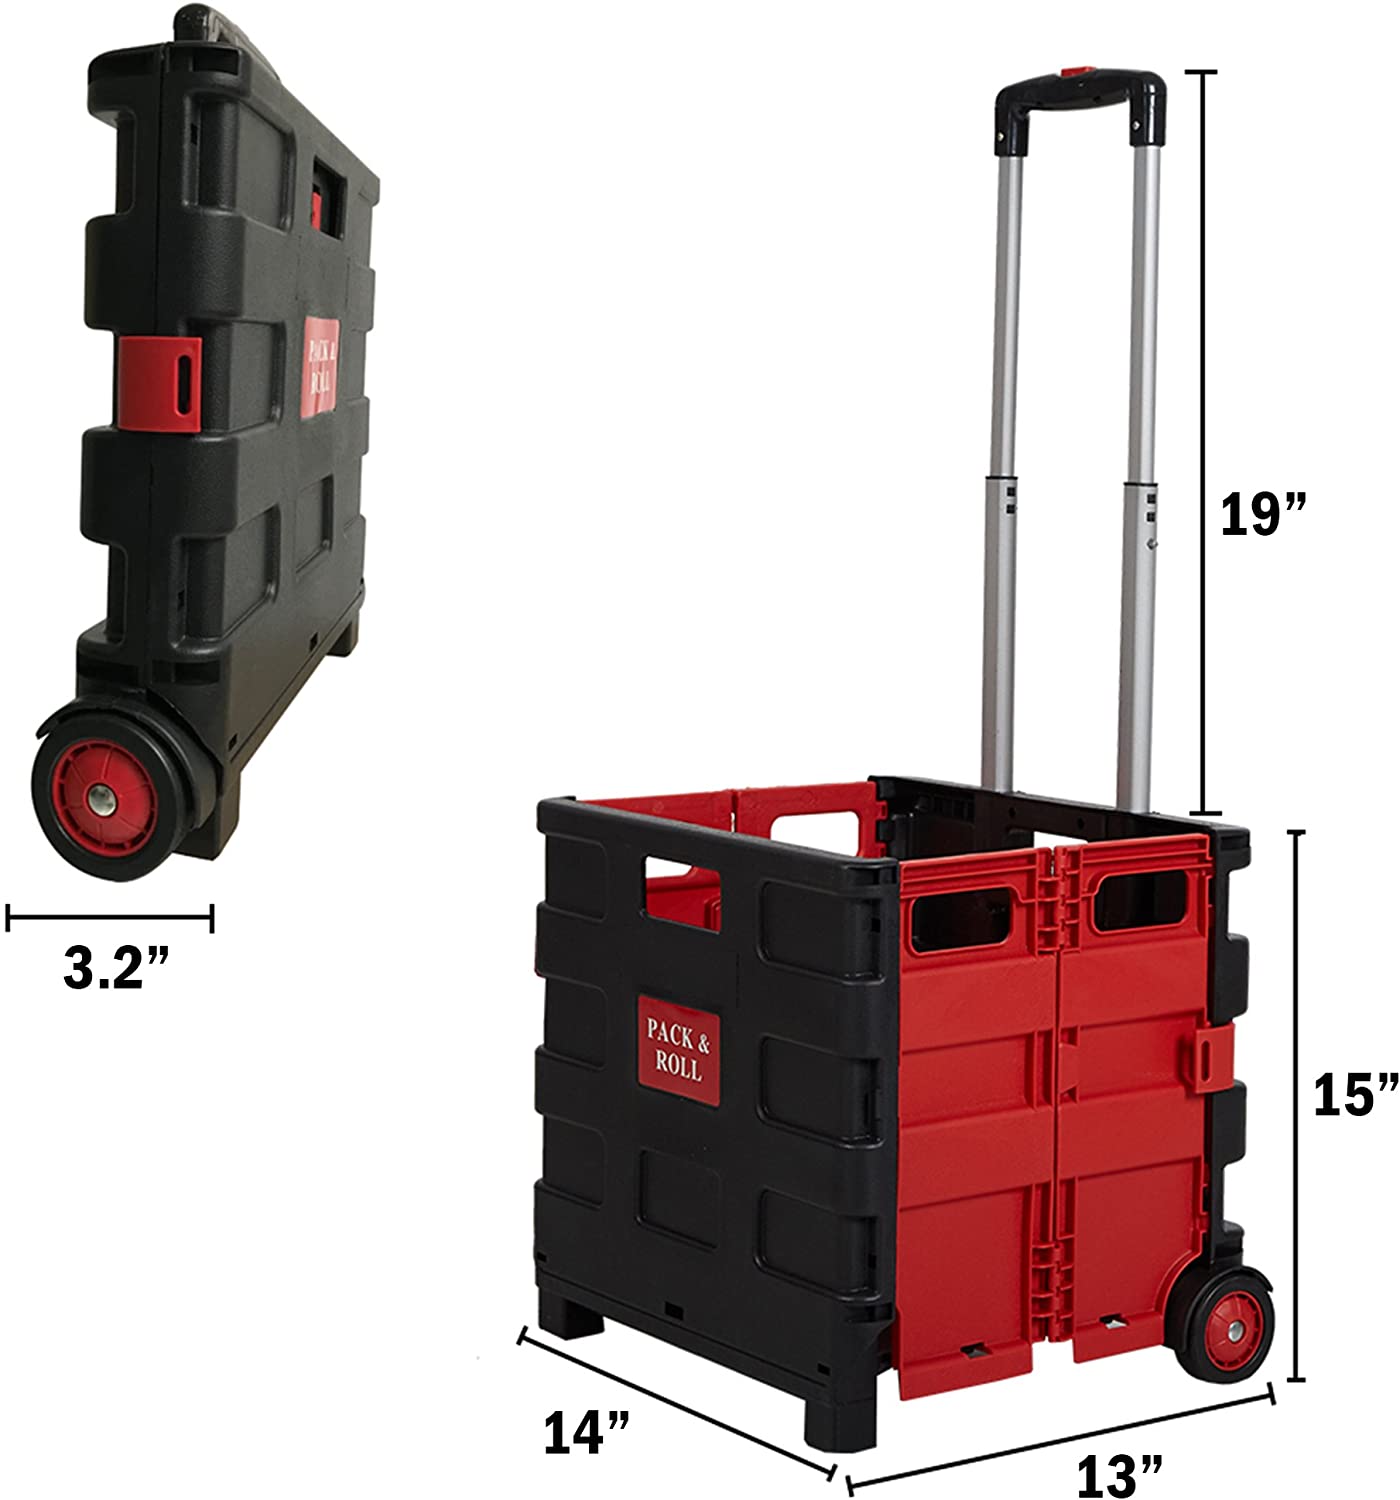 LUCKYERMORE 55lbs Collapsible Rolling Crate Transit Utility Cart Foldable Grocery Cart with Wheels, Red